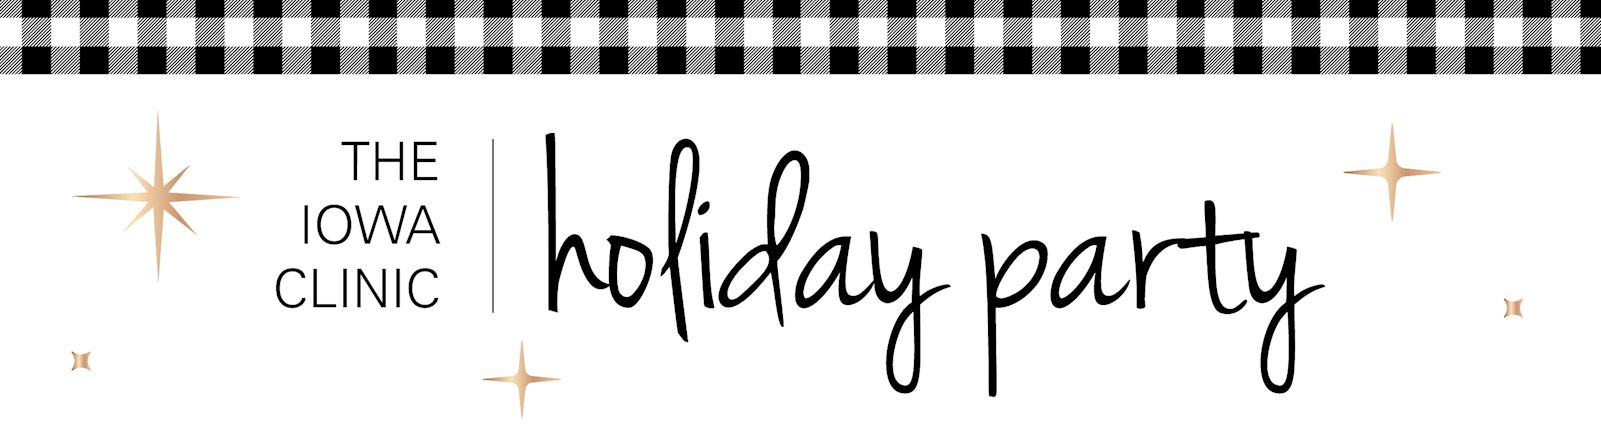 holiday party banner image